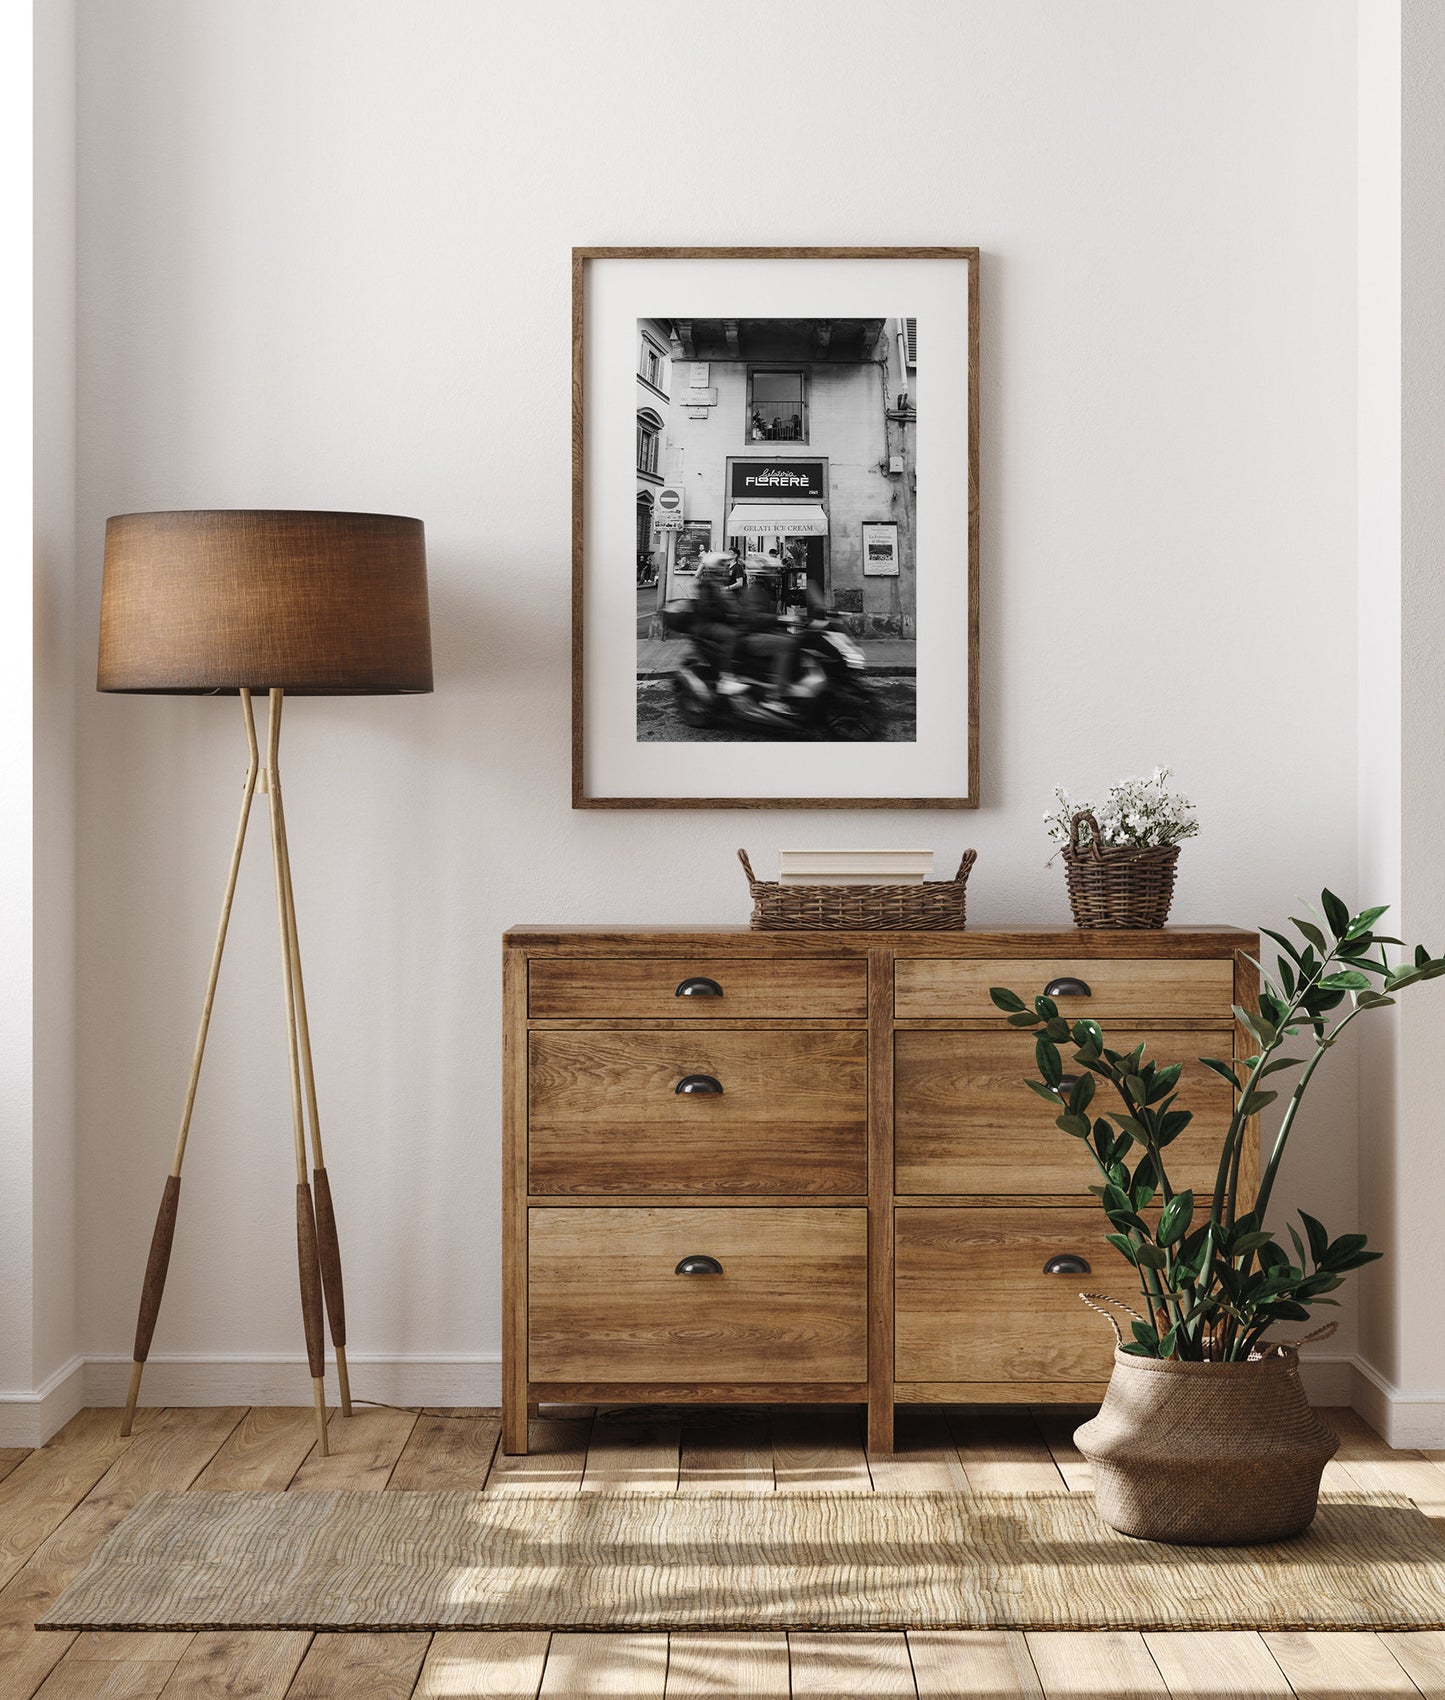 Black and white photography of a motorcycle blurred with speed in Florence, Italy against a wood home decor.